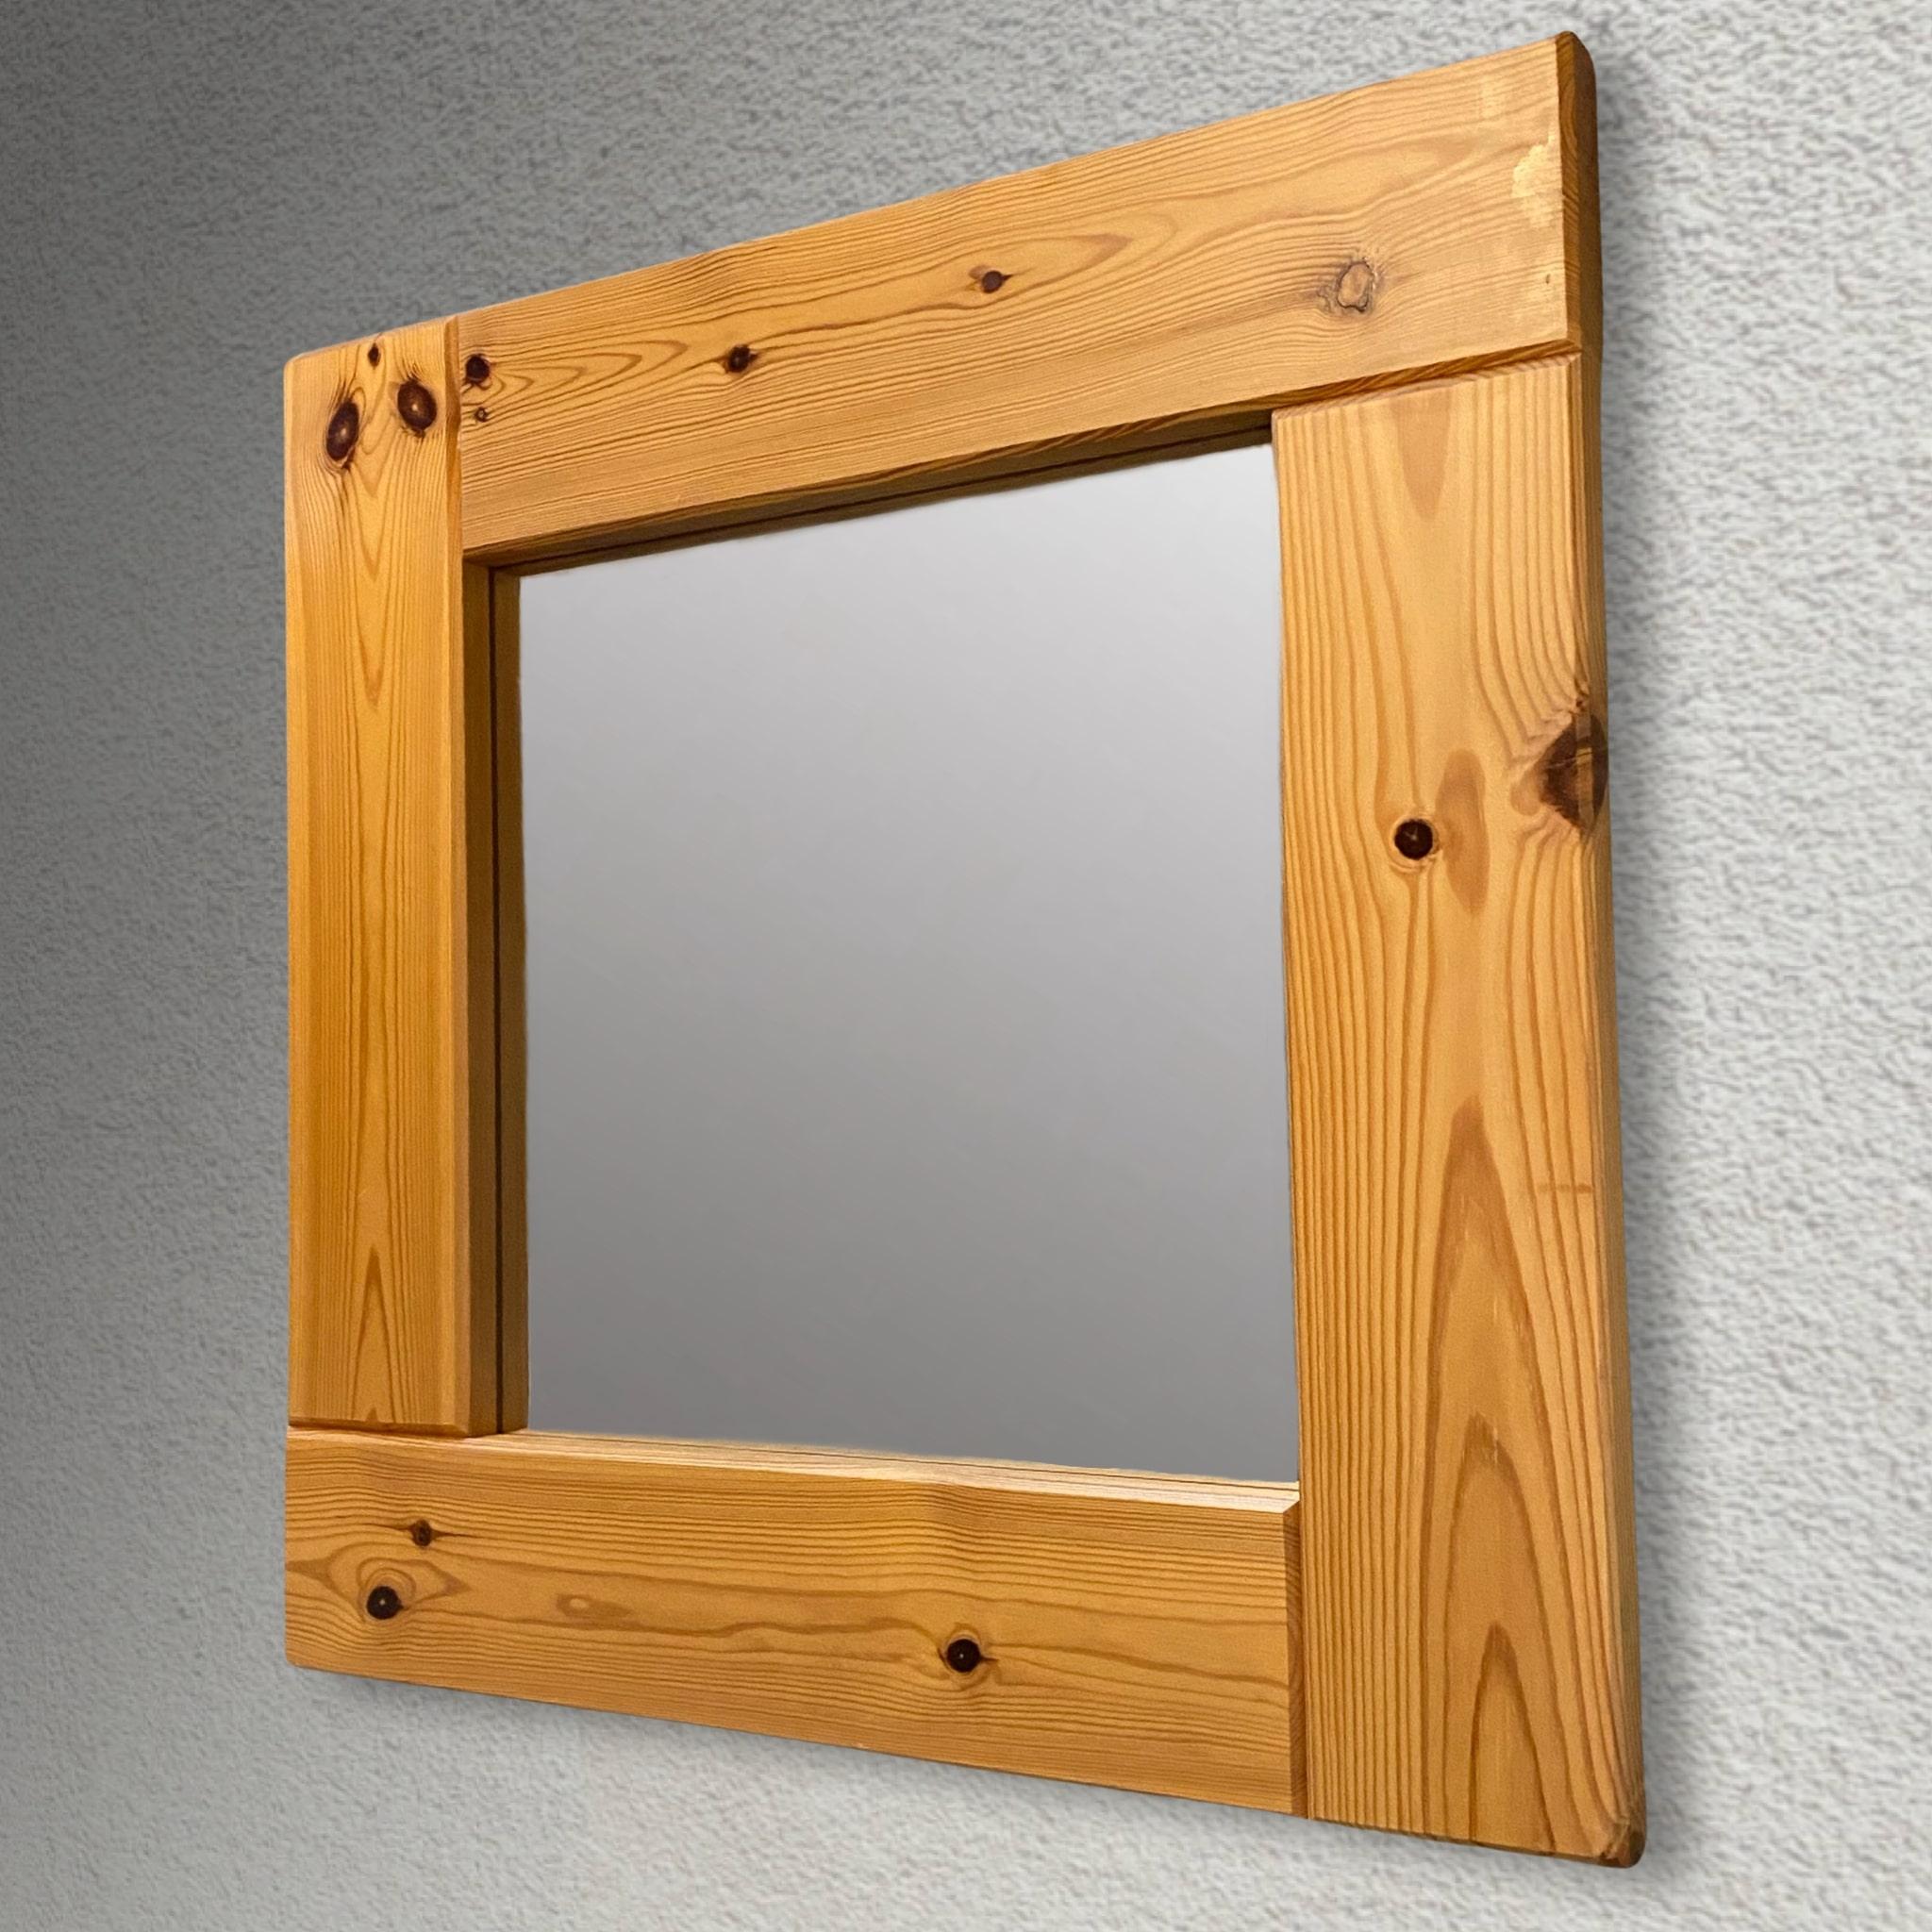 Swedish 1970s mirror made from solid pinewood. Square model with a rustic aesthetic typical of the period. Two plastic fittings on the backside for easy wall mounting.

Pine is a common tree in forests all over Sweden, and it has traditionally been